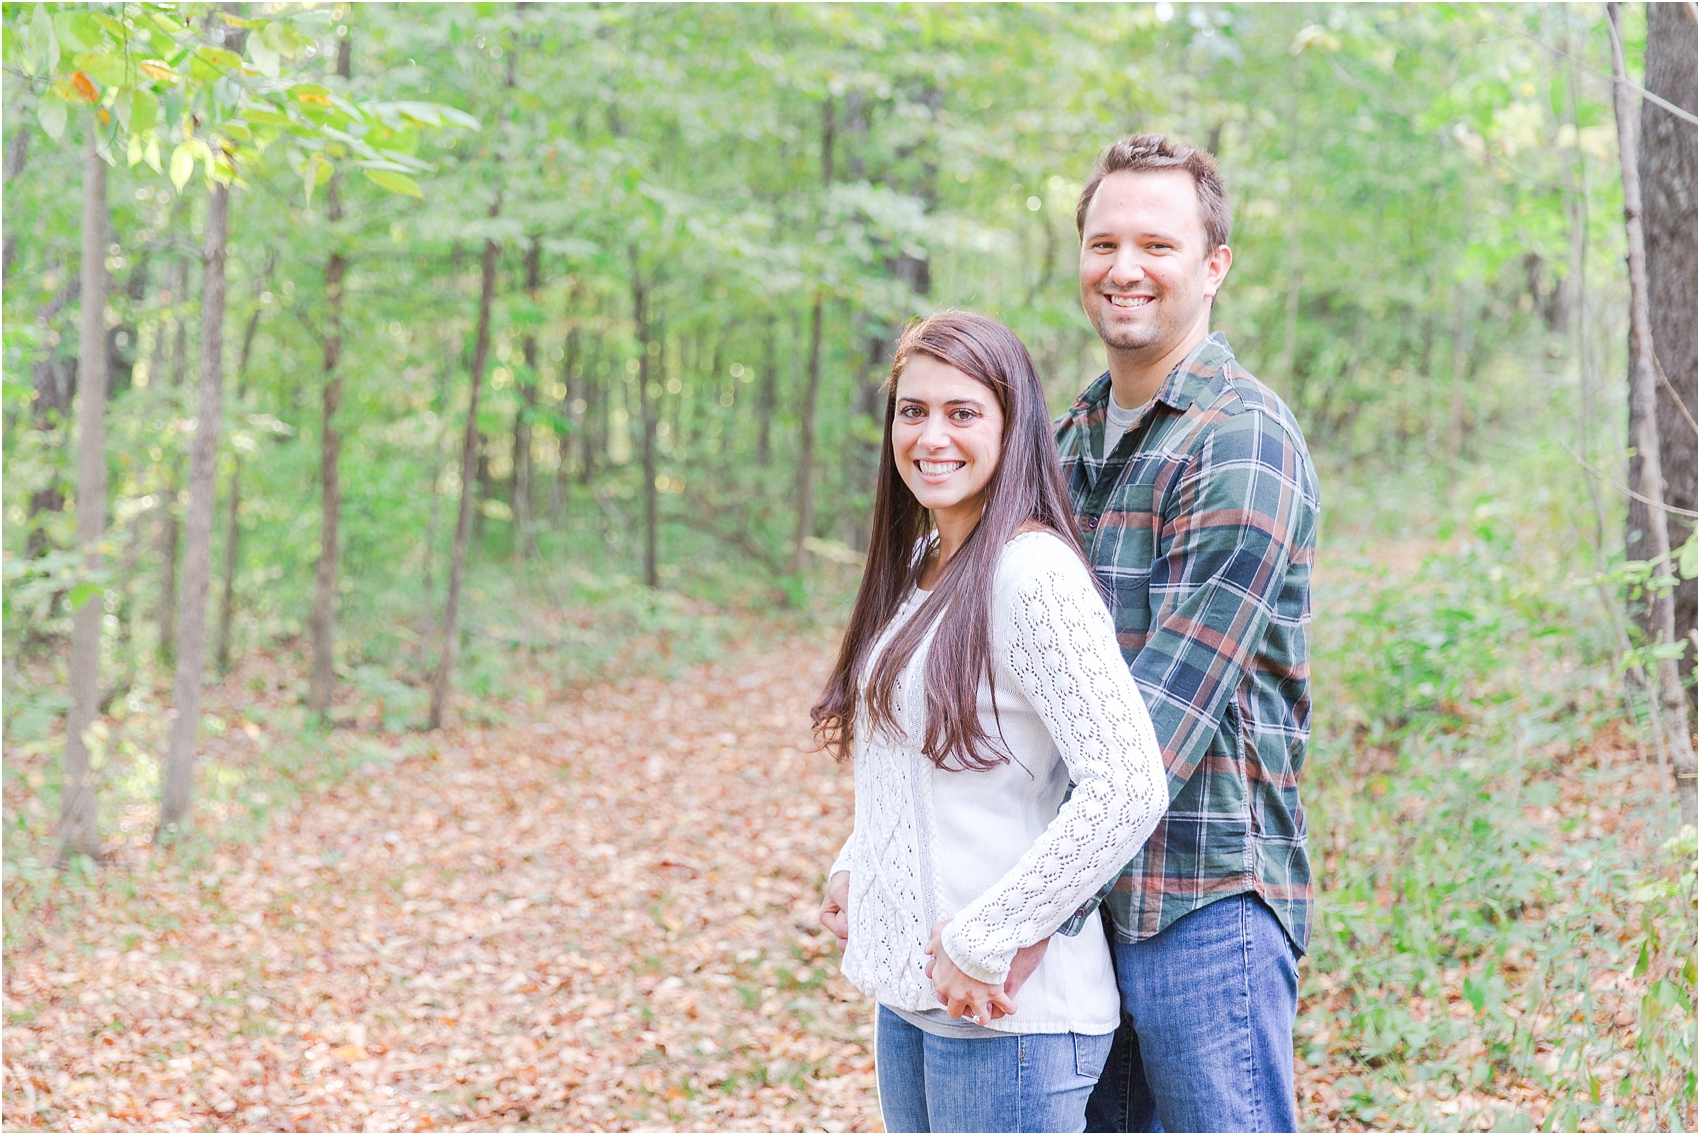 relaxed-autumn-engagement-photos-at-hudson-mills-metropark-in-dexter-mi-by-courtney-carolyn-photography_0037.jpg